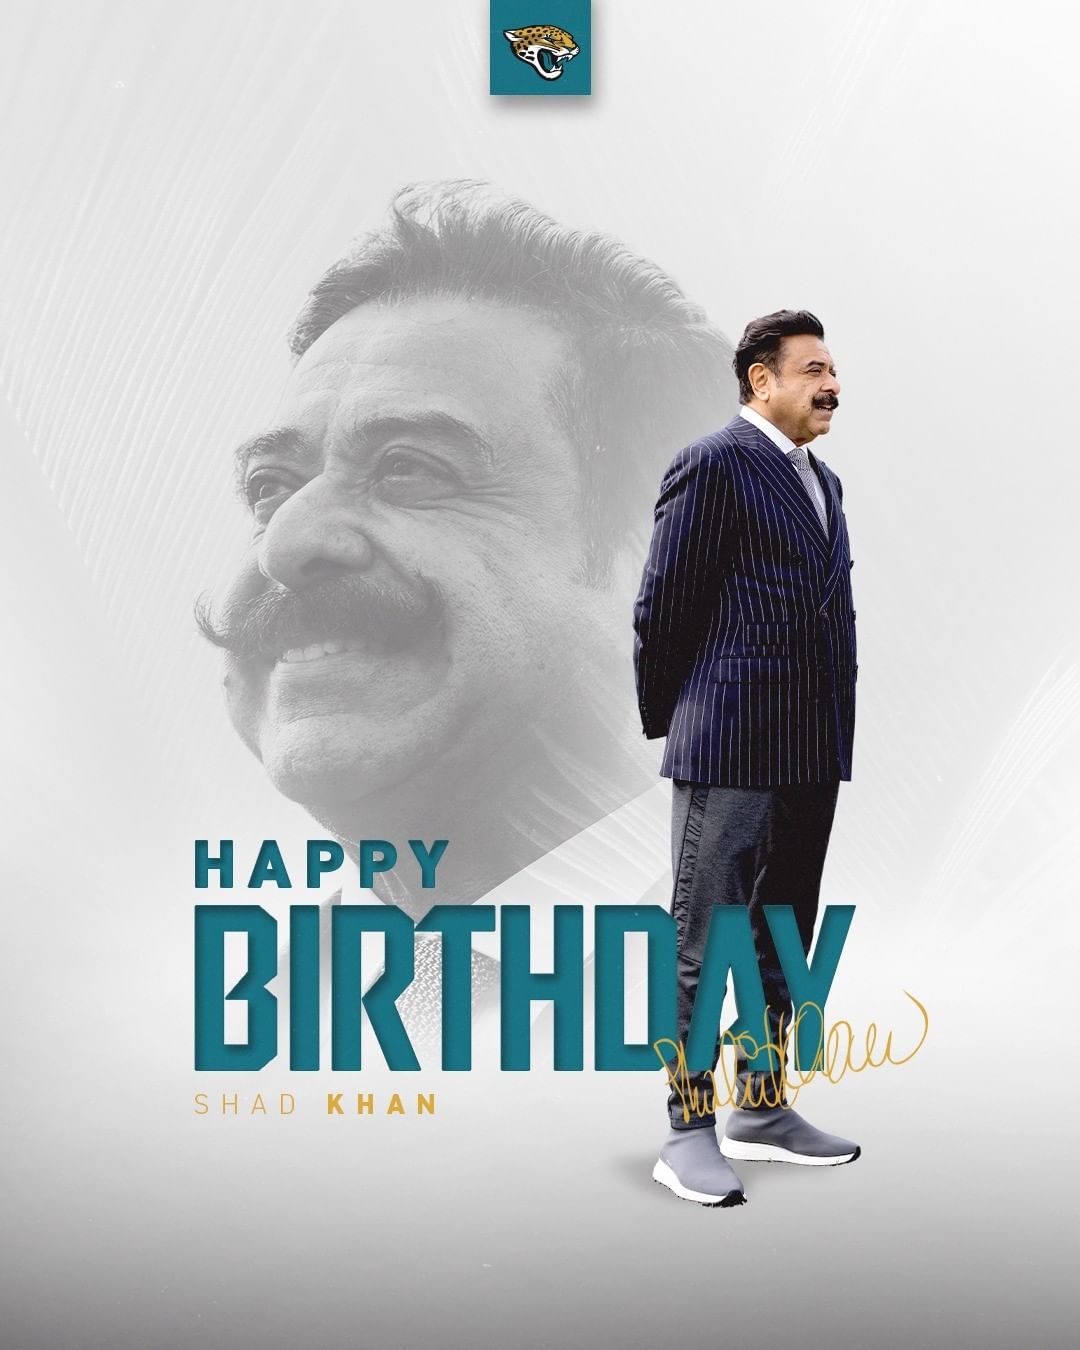 Sending a very special happy birthday to Shad Khan!  #DUUUVAL...